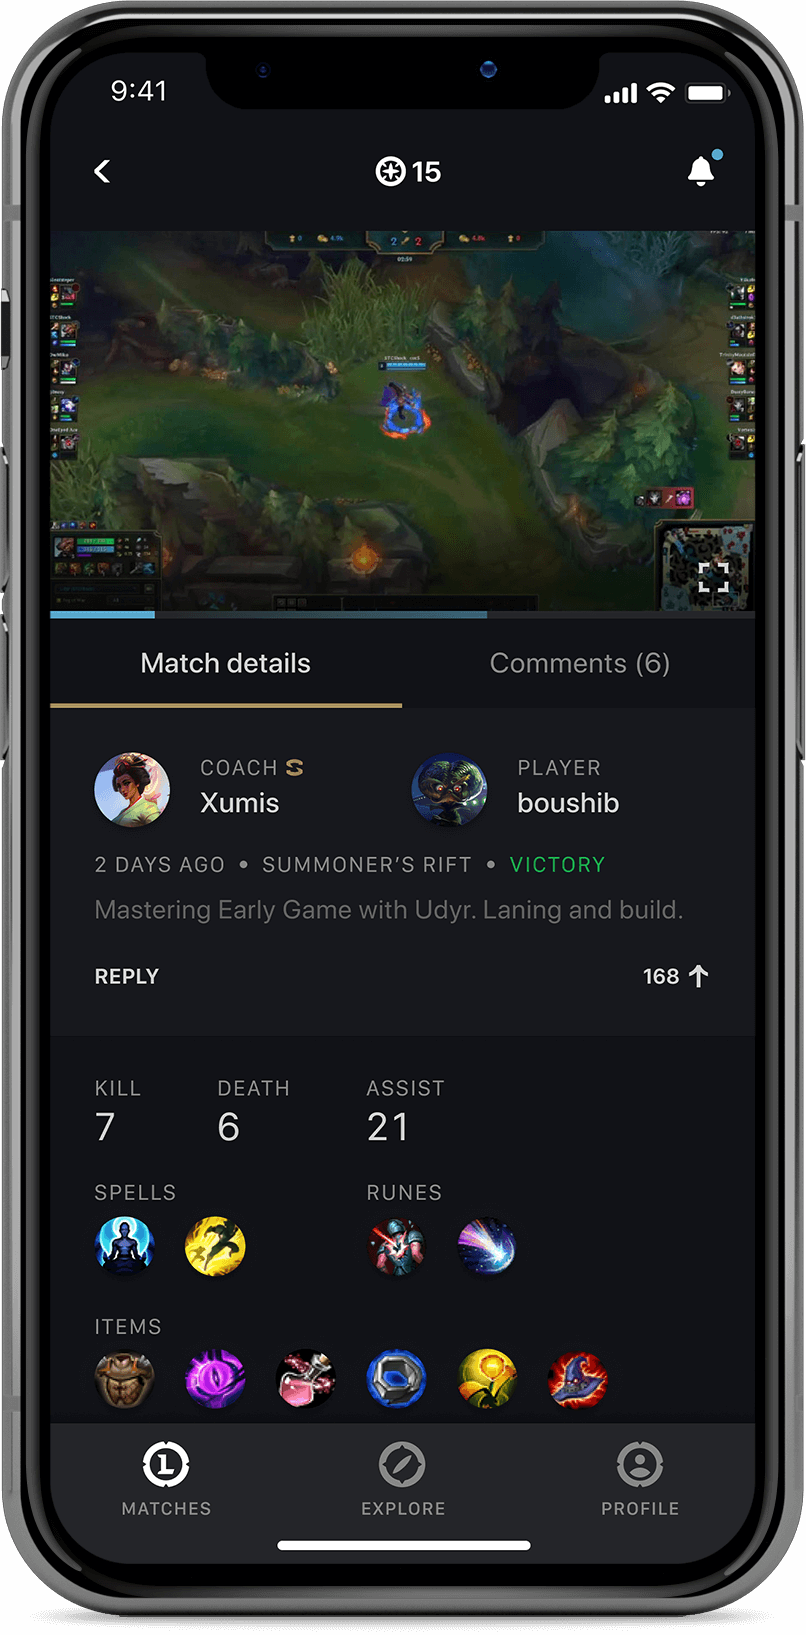 Sage App — Personal Coaching for League of Legends